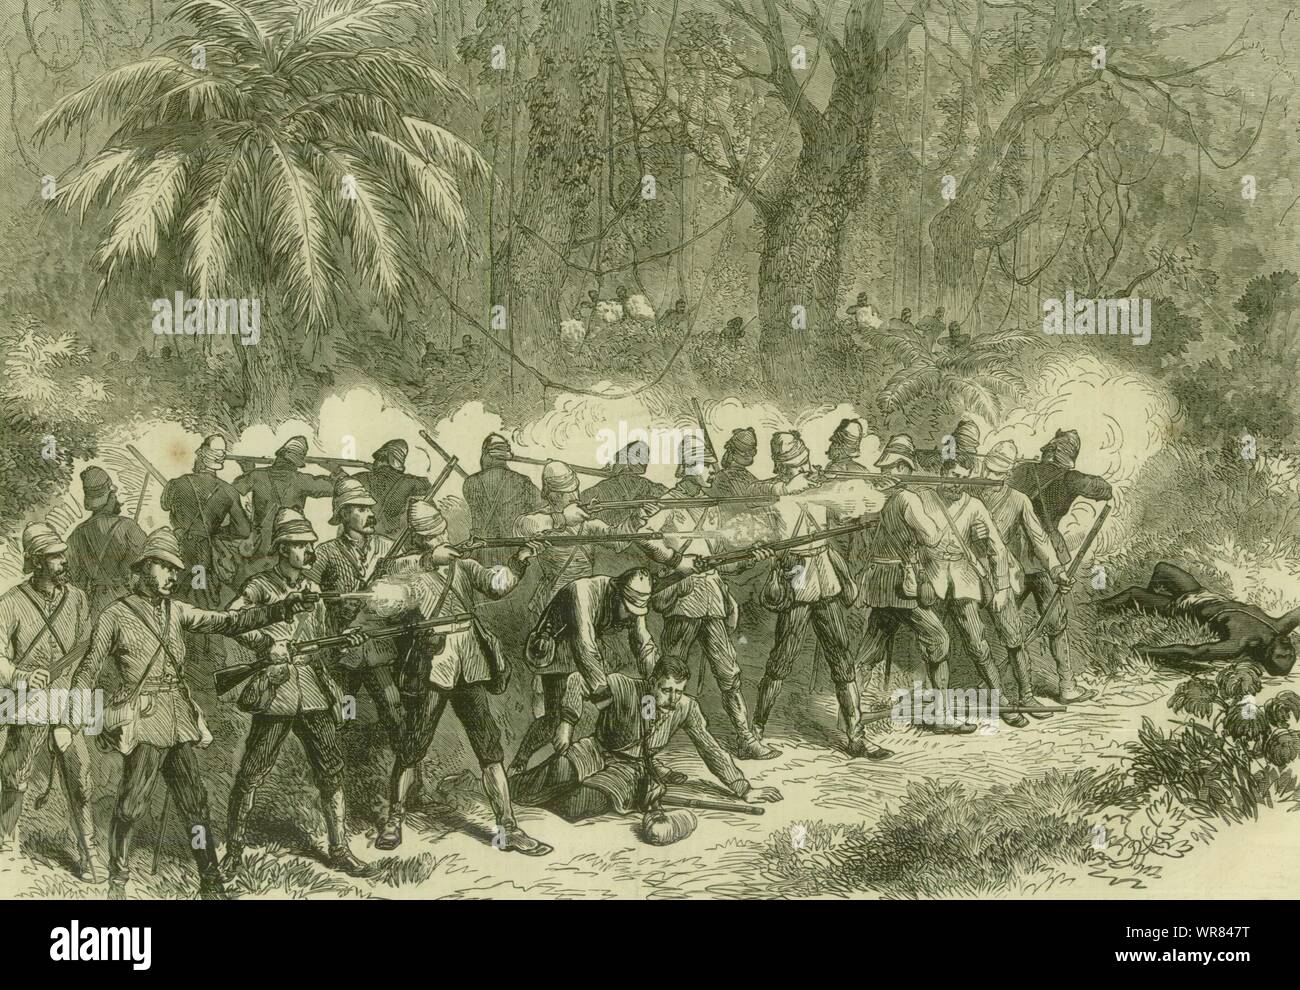 The Third Anglo-Ashanti War: The 42nd Highlanders in the front. Ghana 1874 Stock Photo